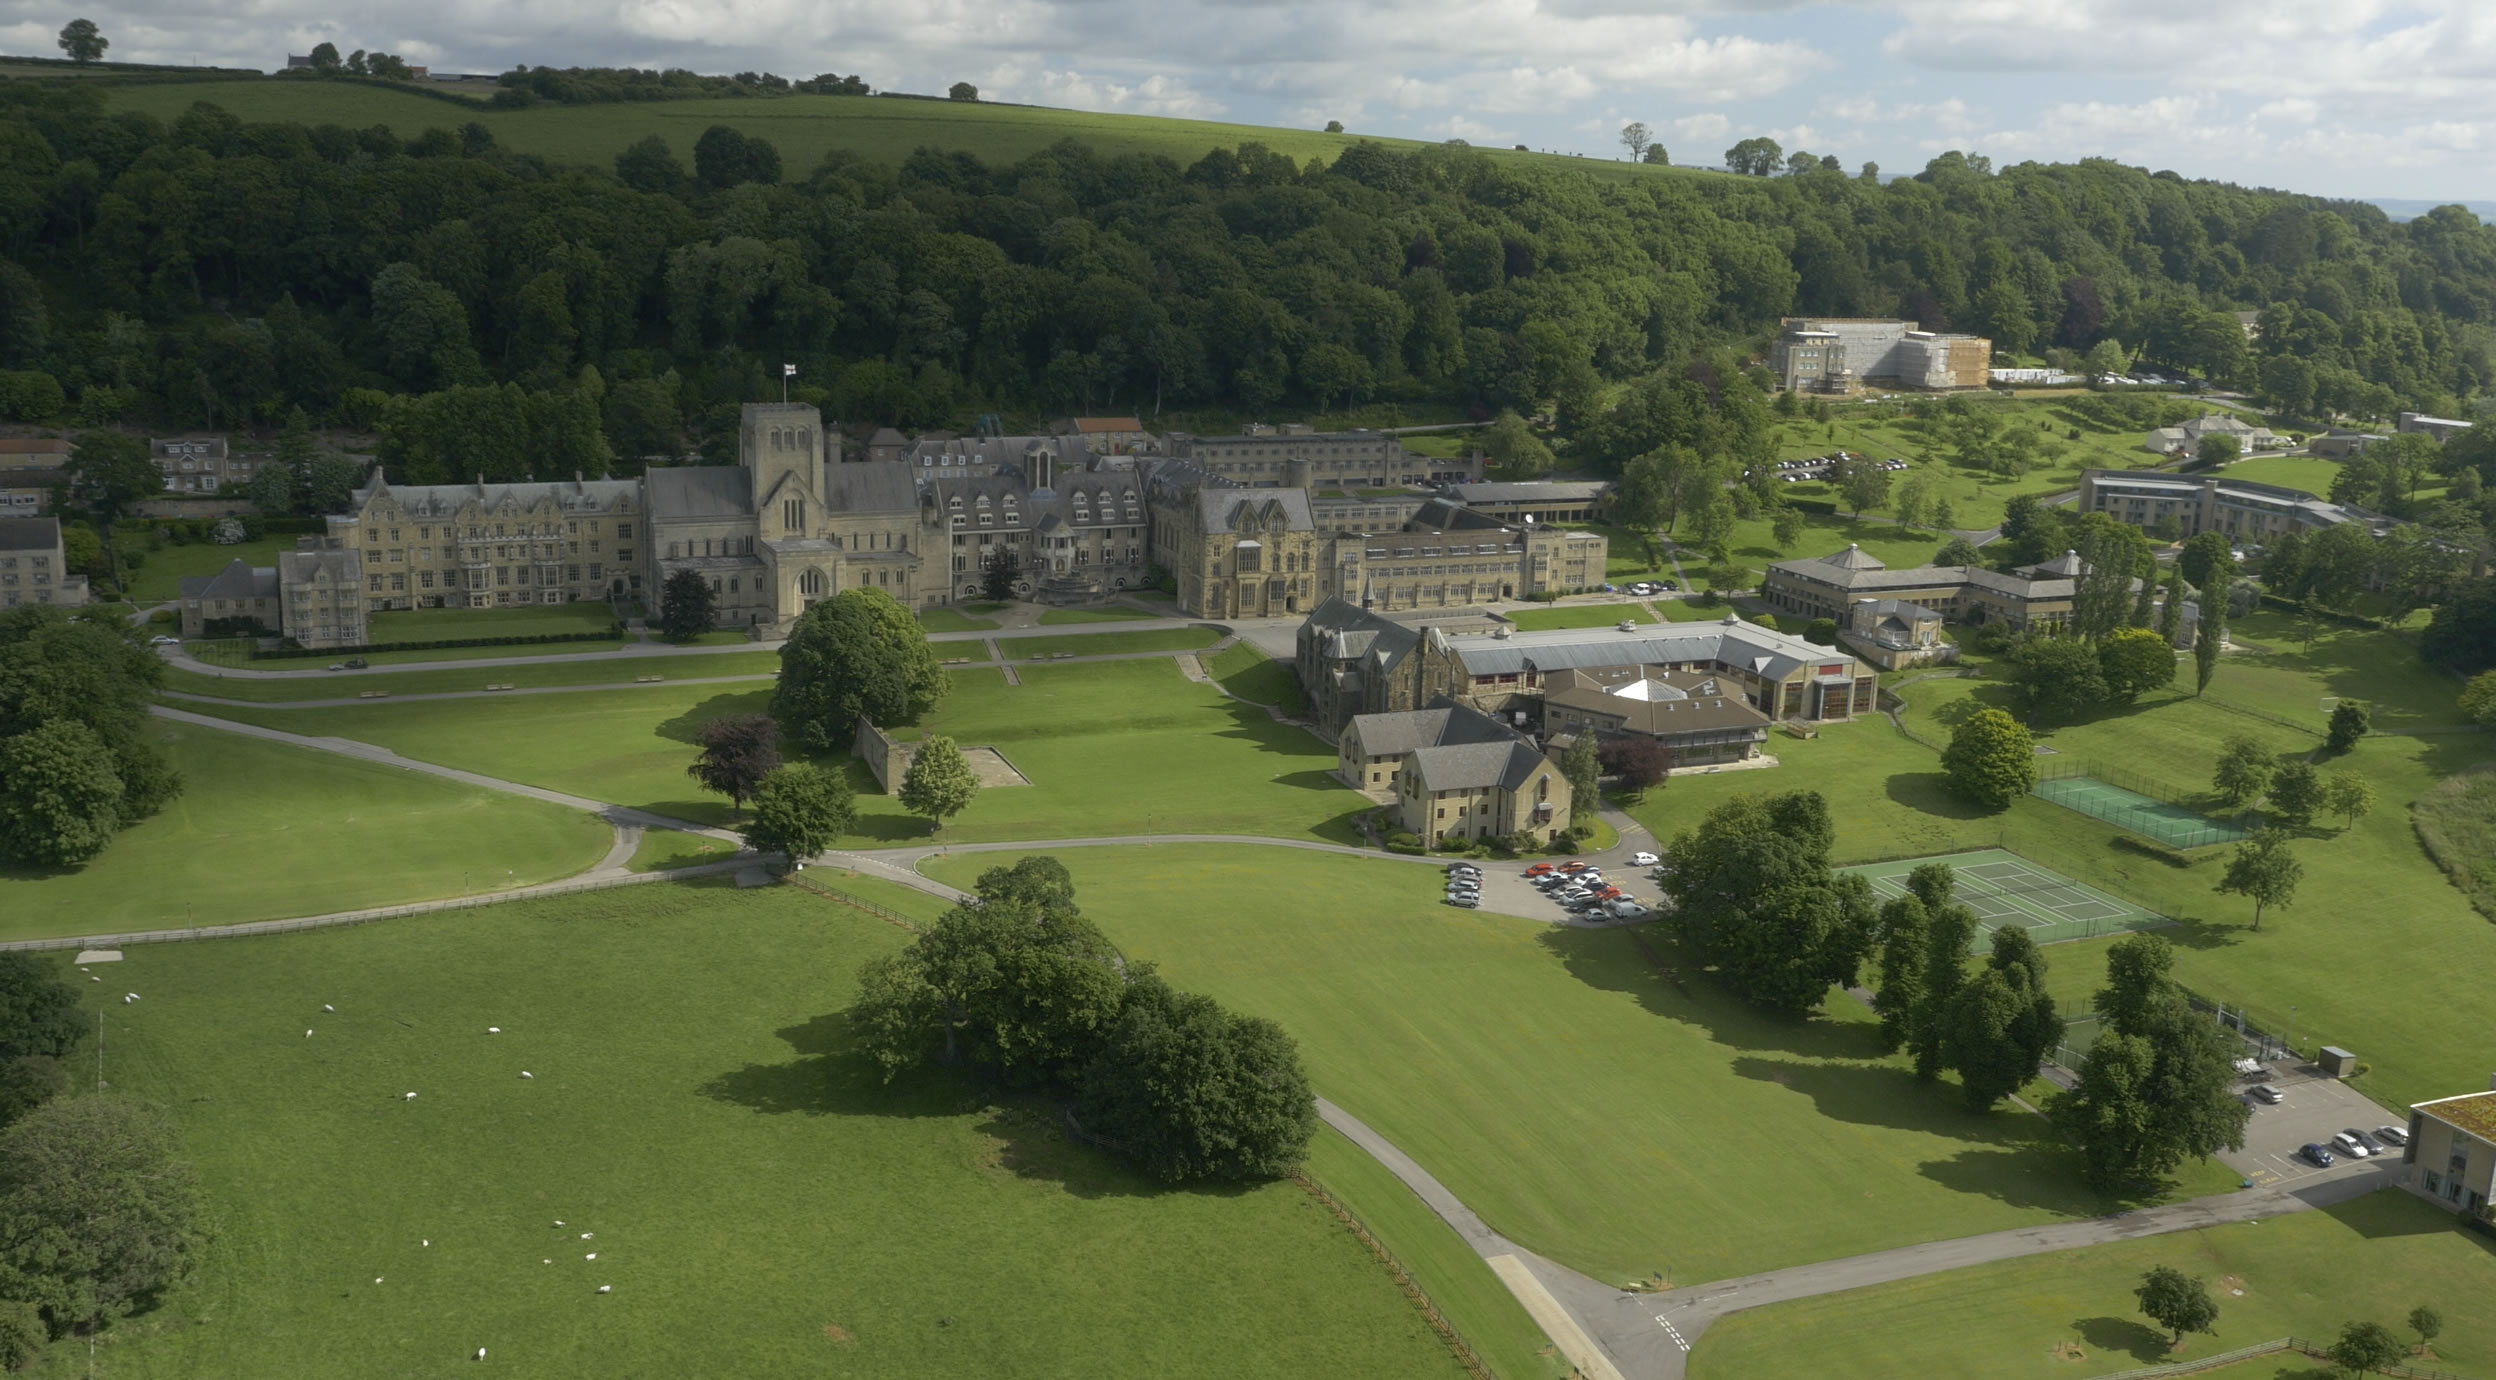 Aerial photograph of the Ampleforth estate and the grounds around it, including the carpark and tennis courts